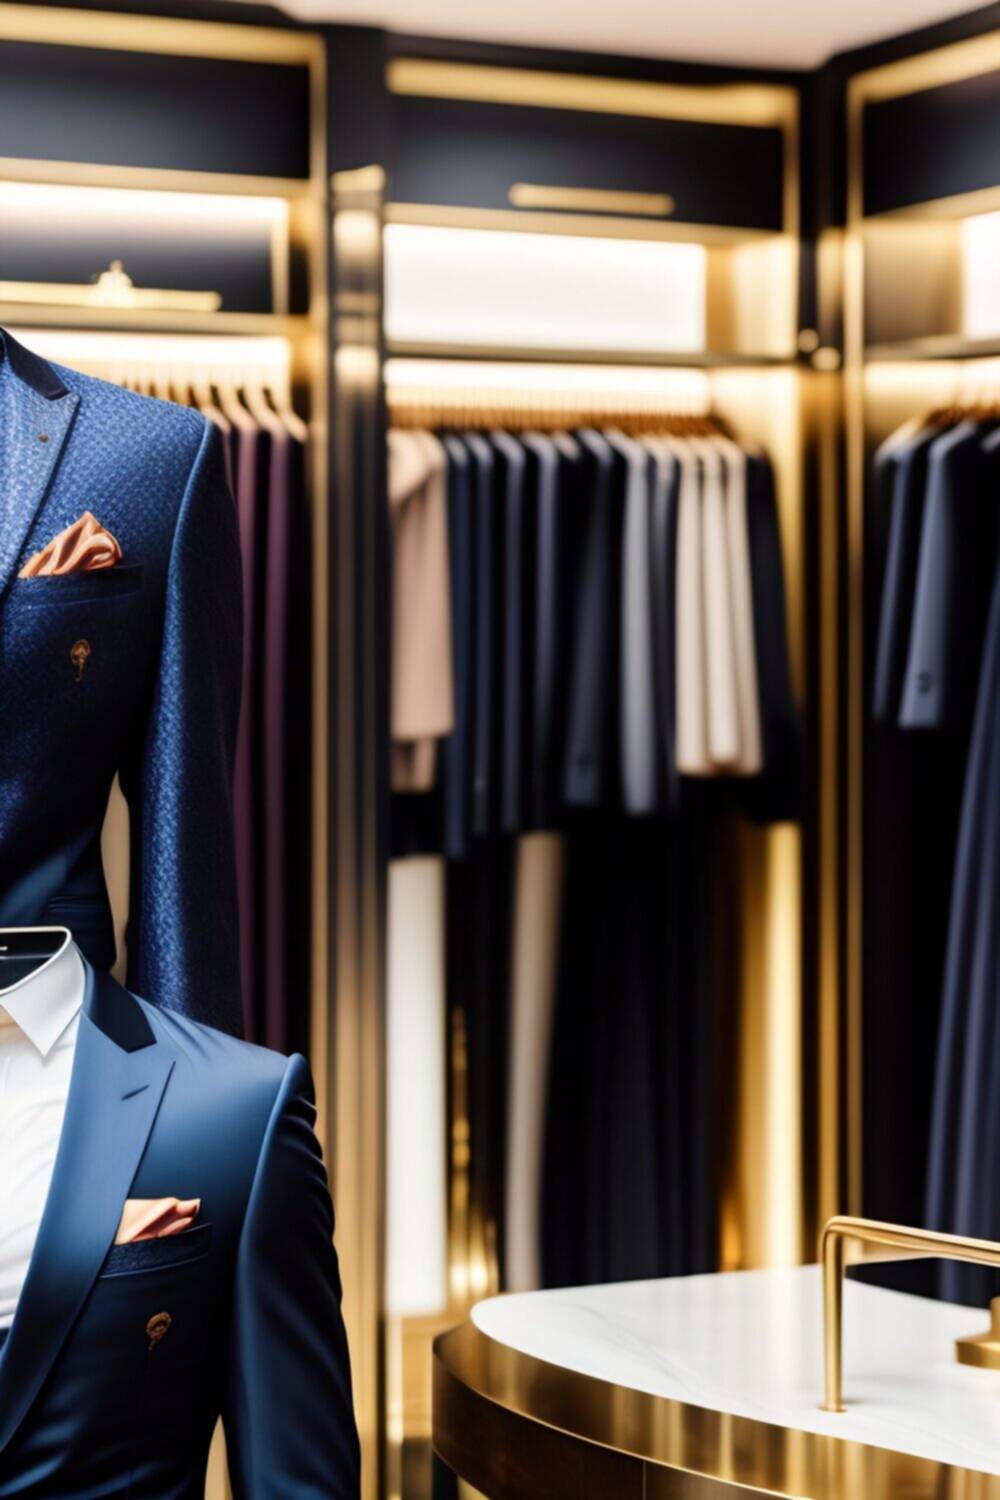 The Best Shopping Destinations for High-End Luxury Brands